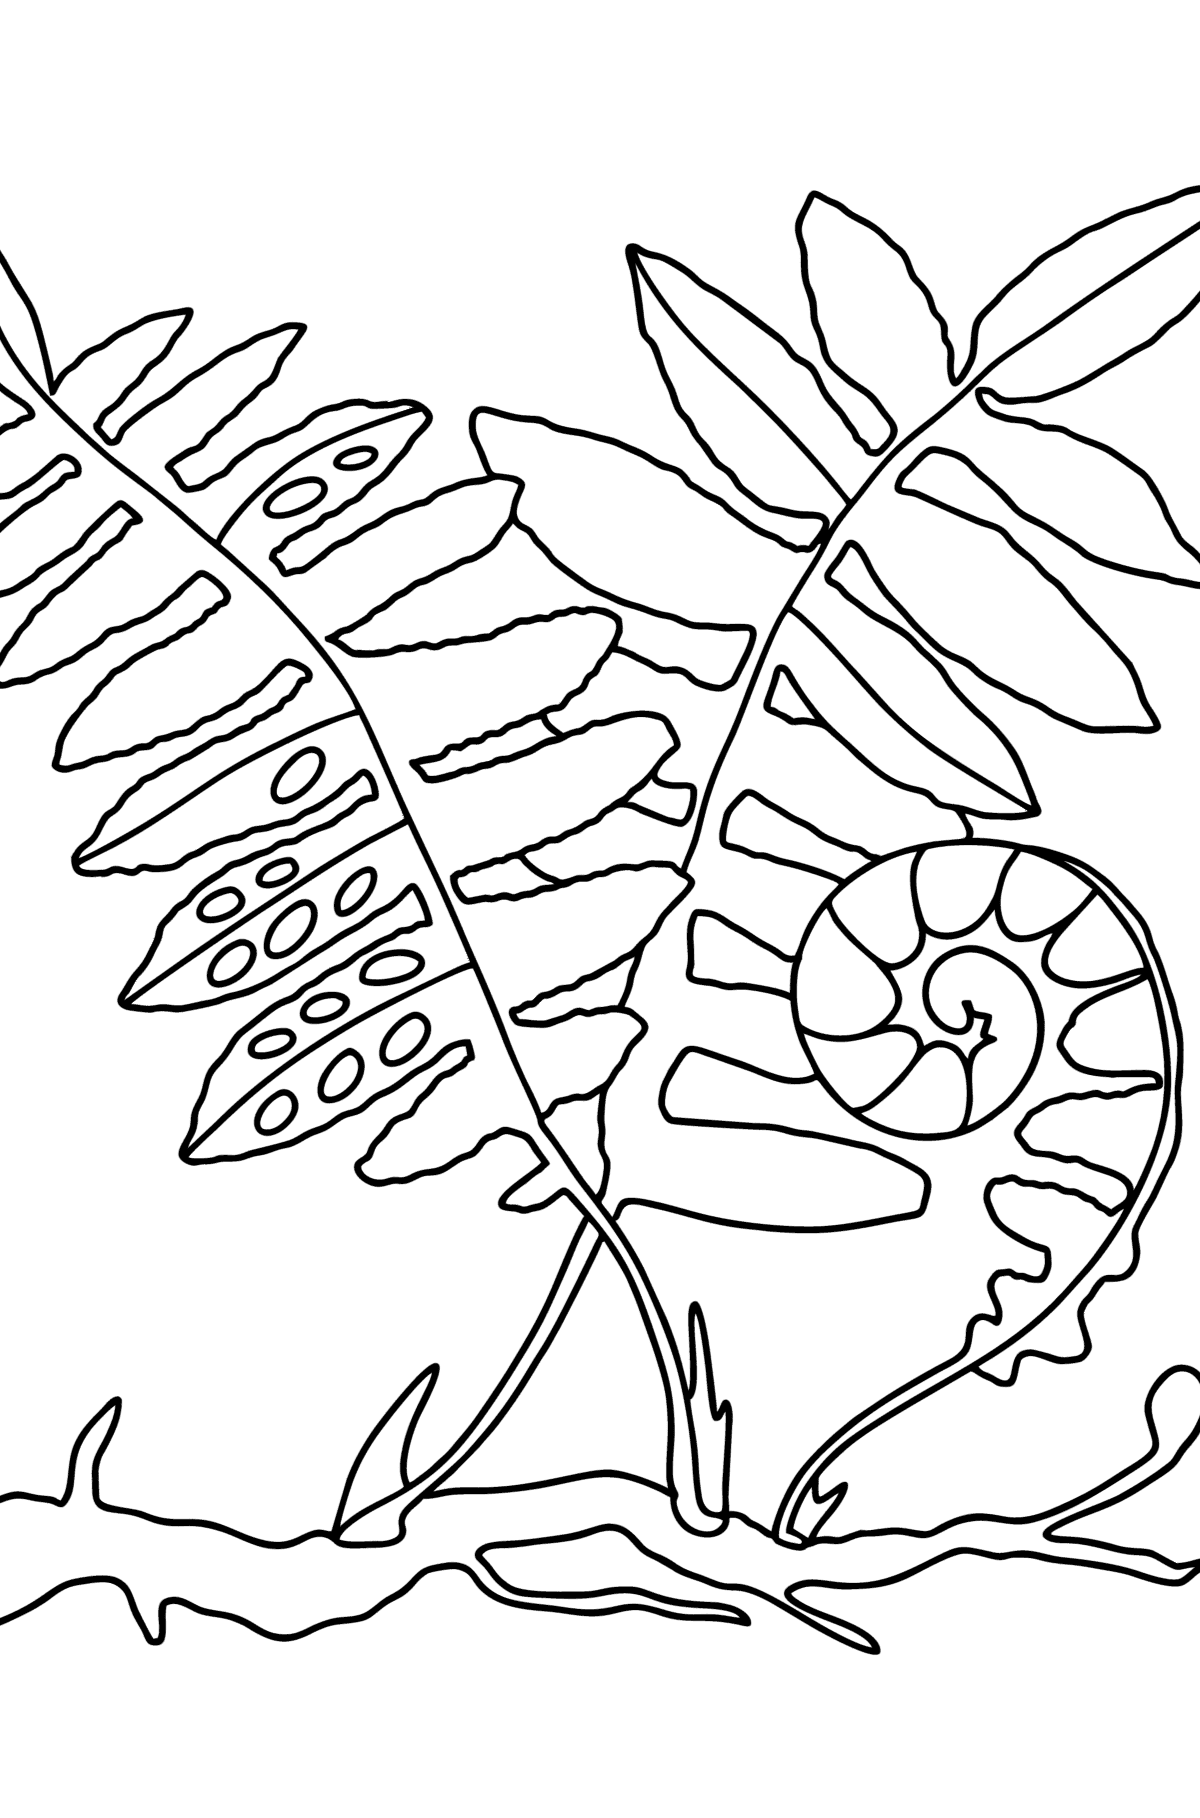 Fern Leaves coloring page - Coloring Pages for Kids